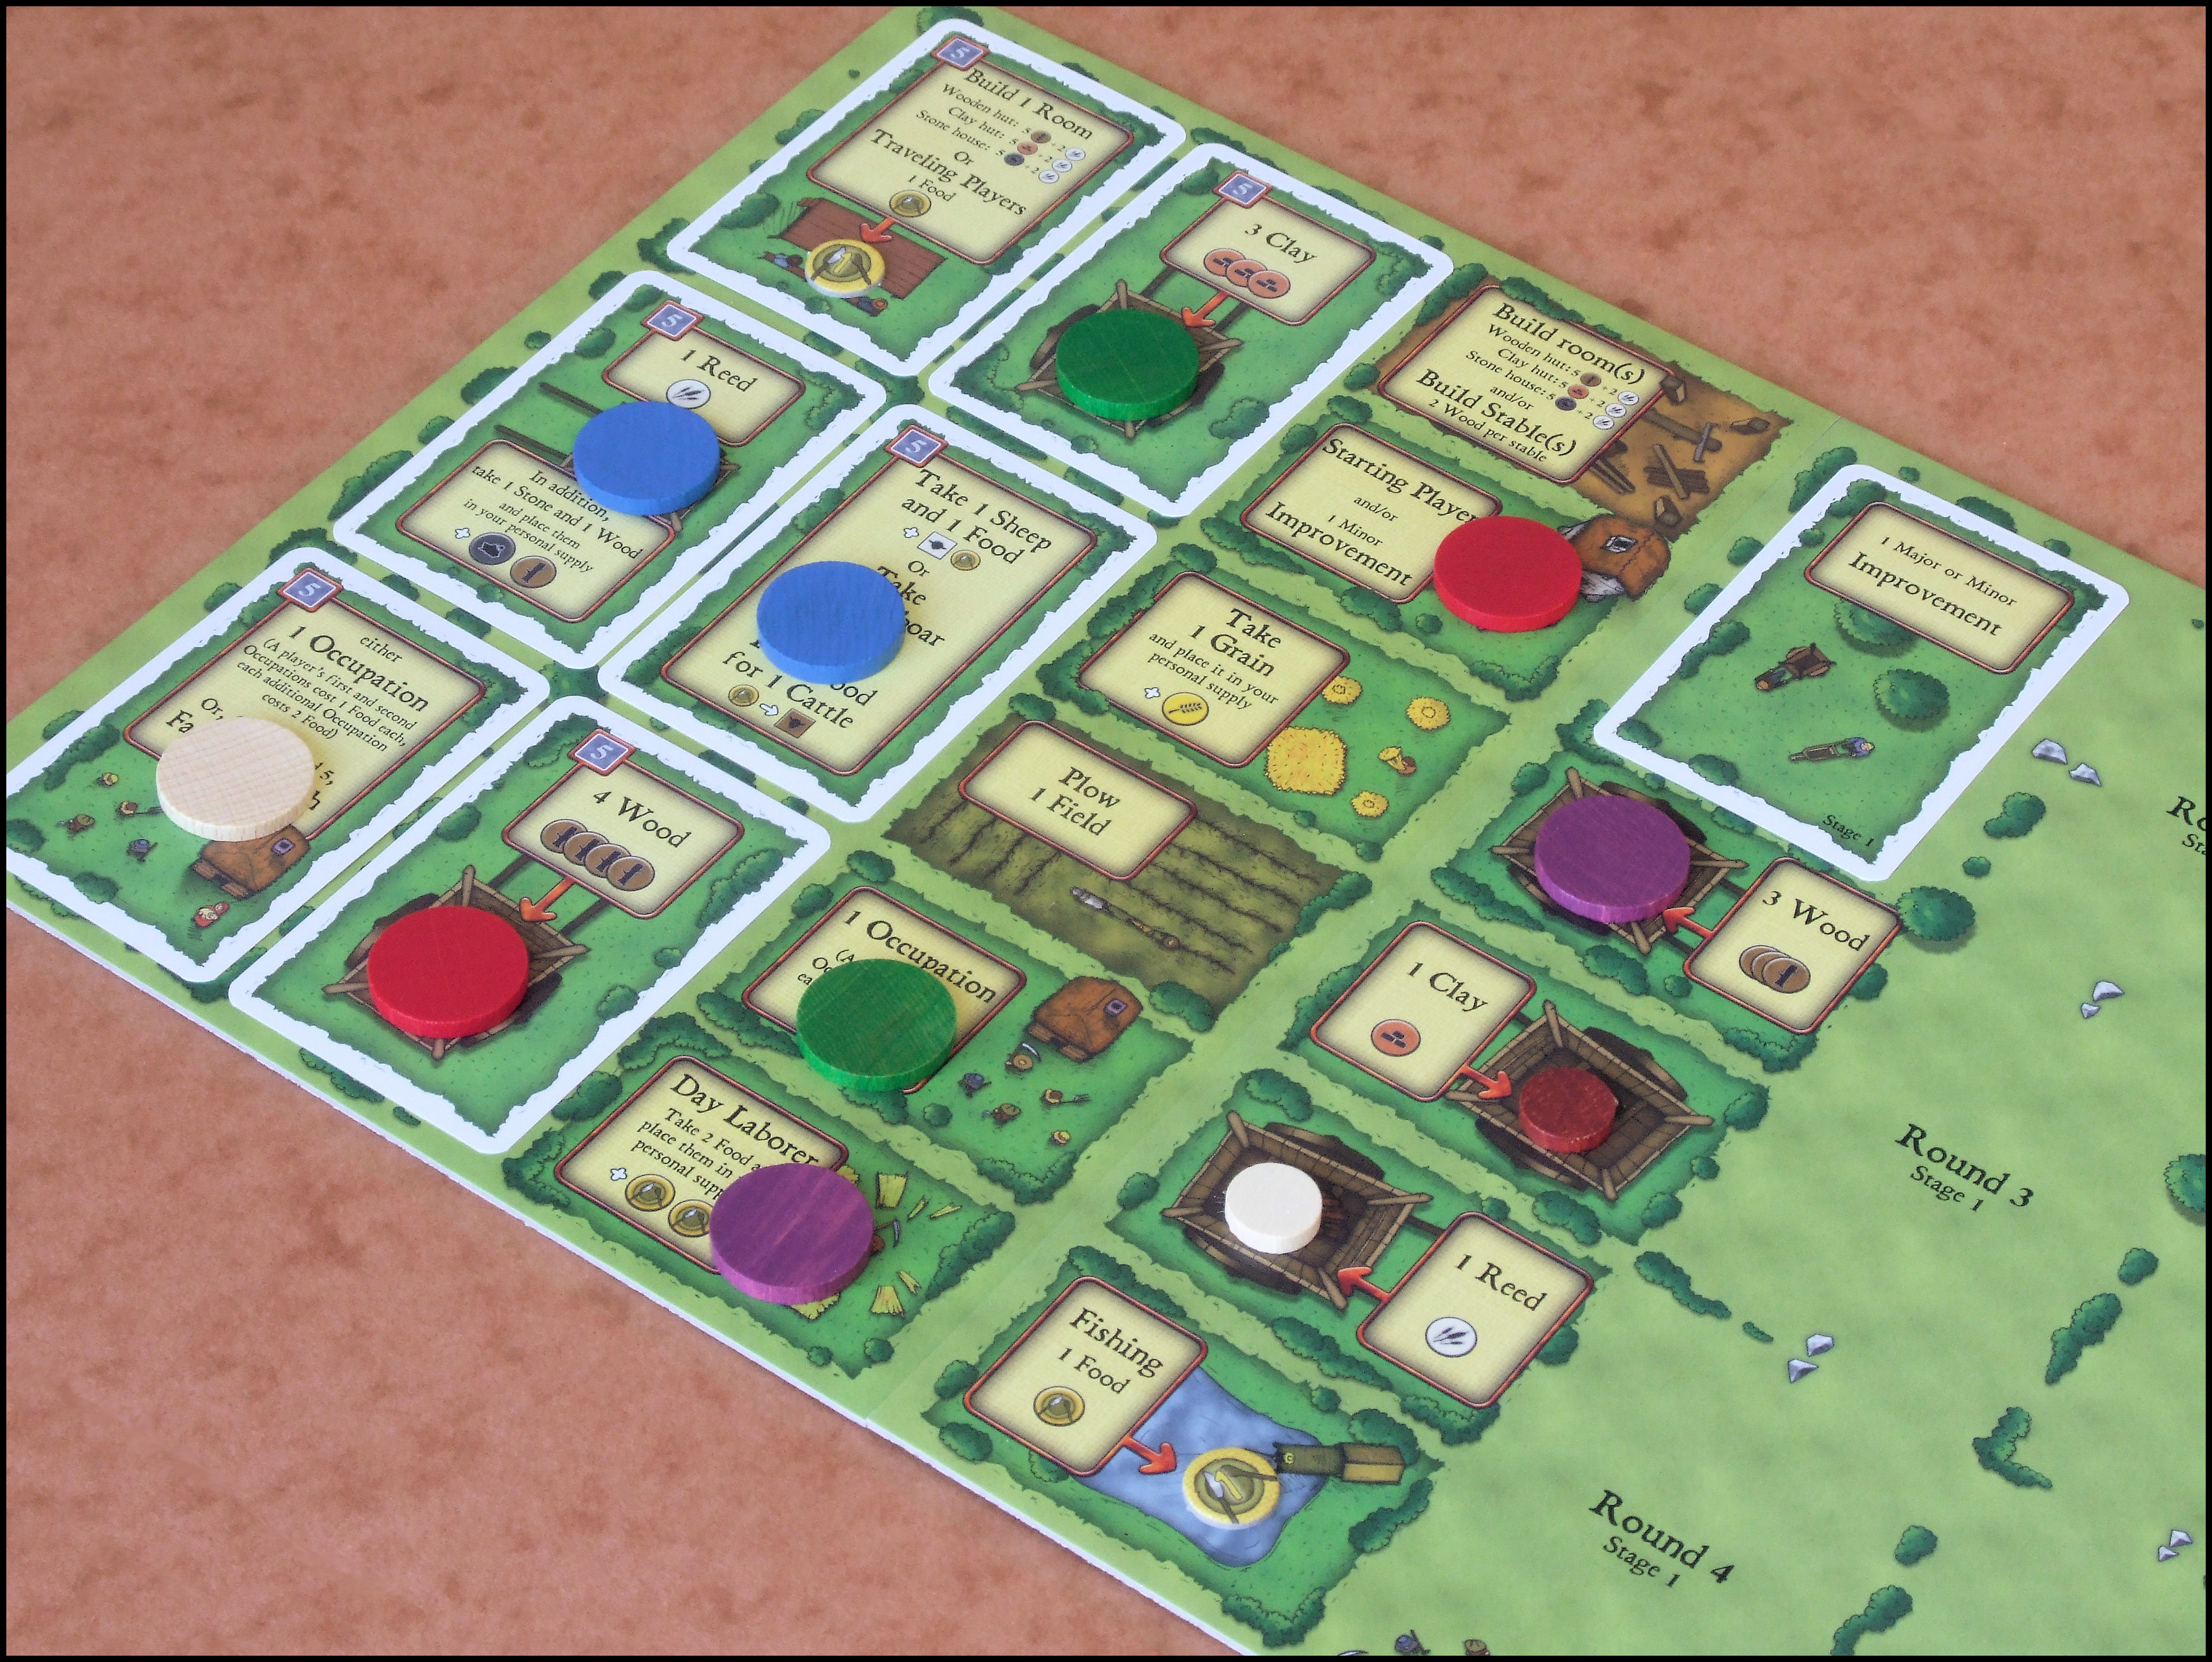 Agricola - 1st Turn 9th Action